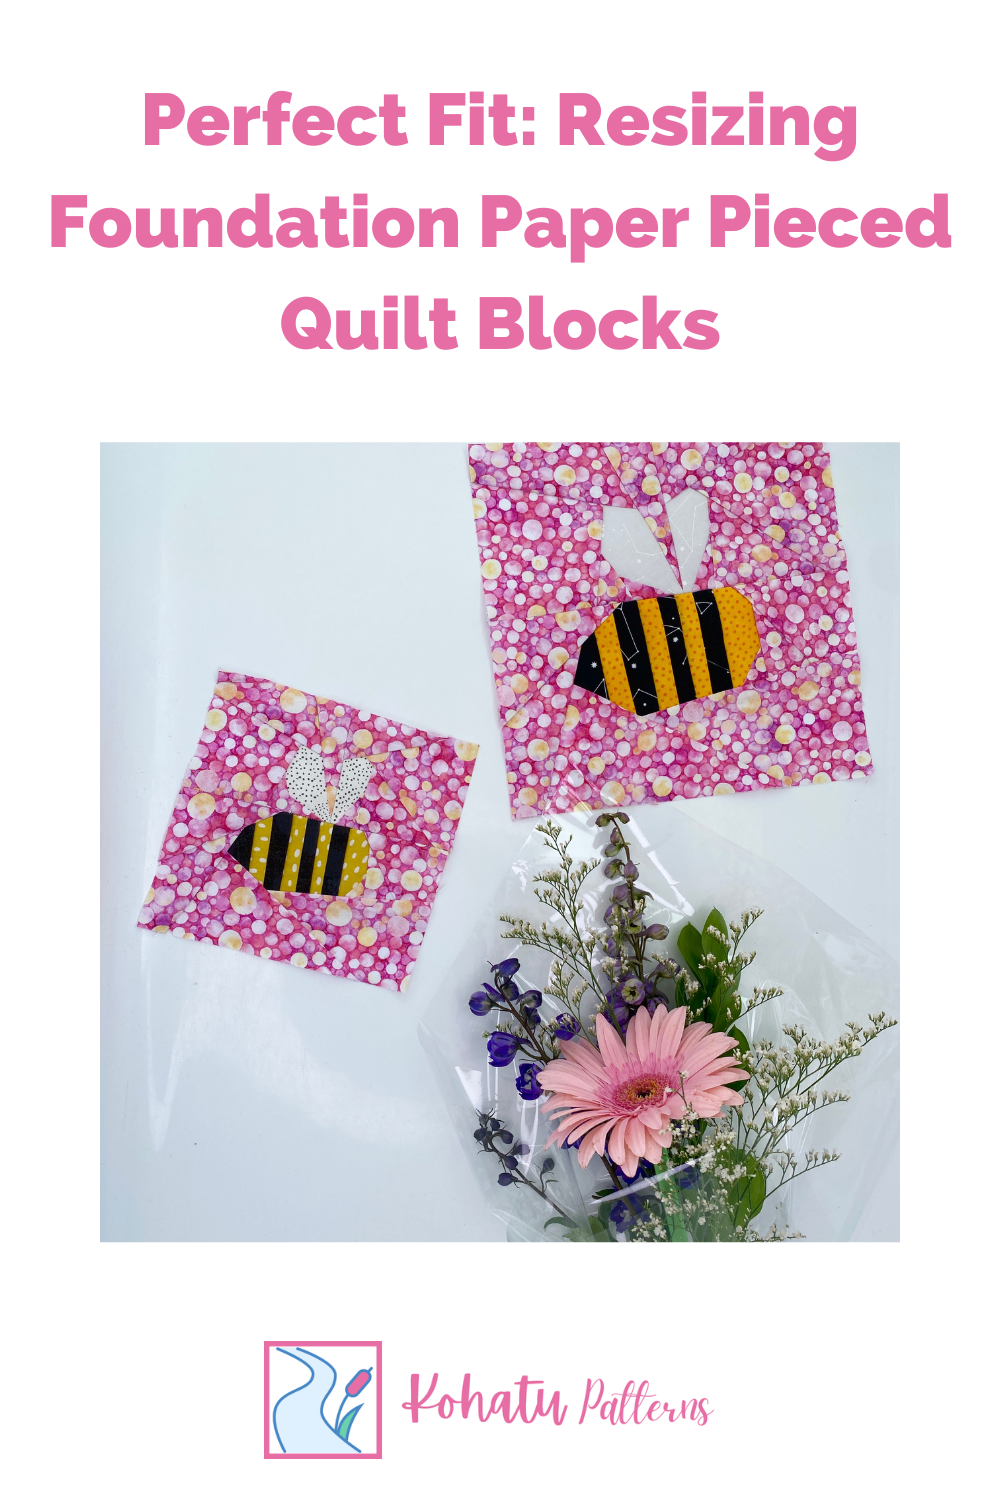 If you need a different sized quilt block to the one provided by a pattern designer, there is an easy way to adjust the size at home.